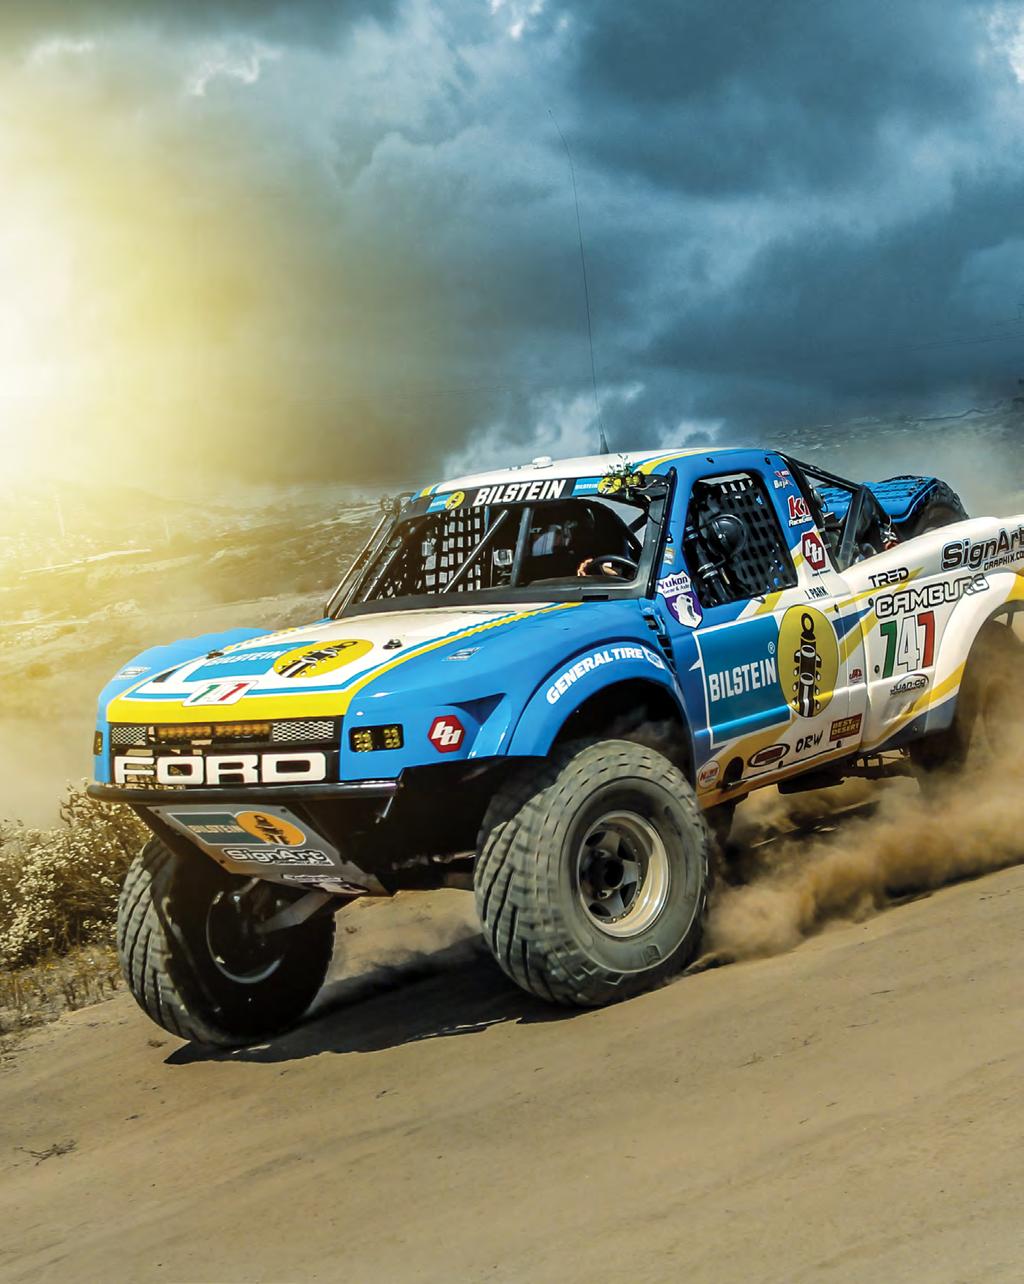 PROFESSIONAL OFF-ROAD RACING. BILSTEIN M 9200 (BYPASS). Performance dialed in.